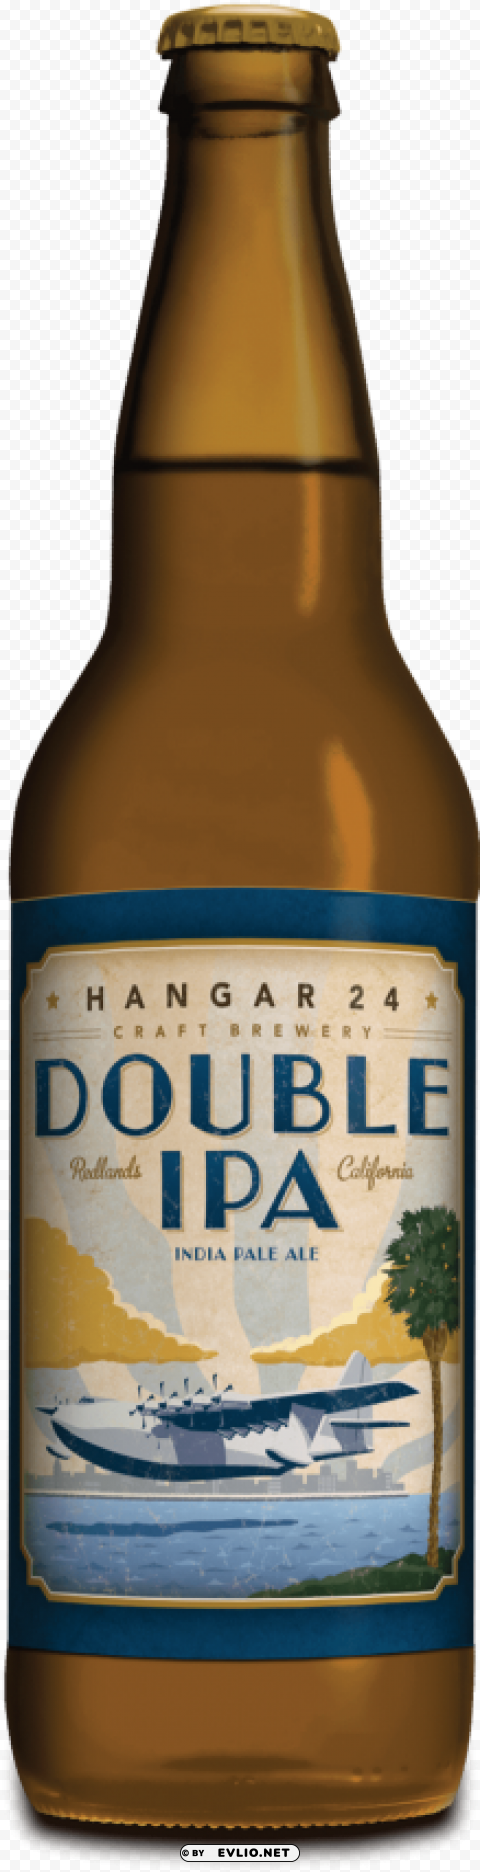 double ipa bottle PNG graphics with alpha transparency broad collection